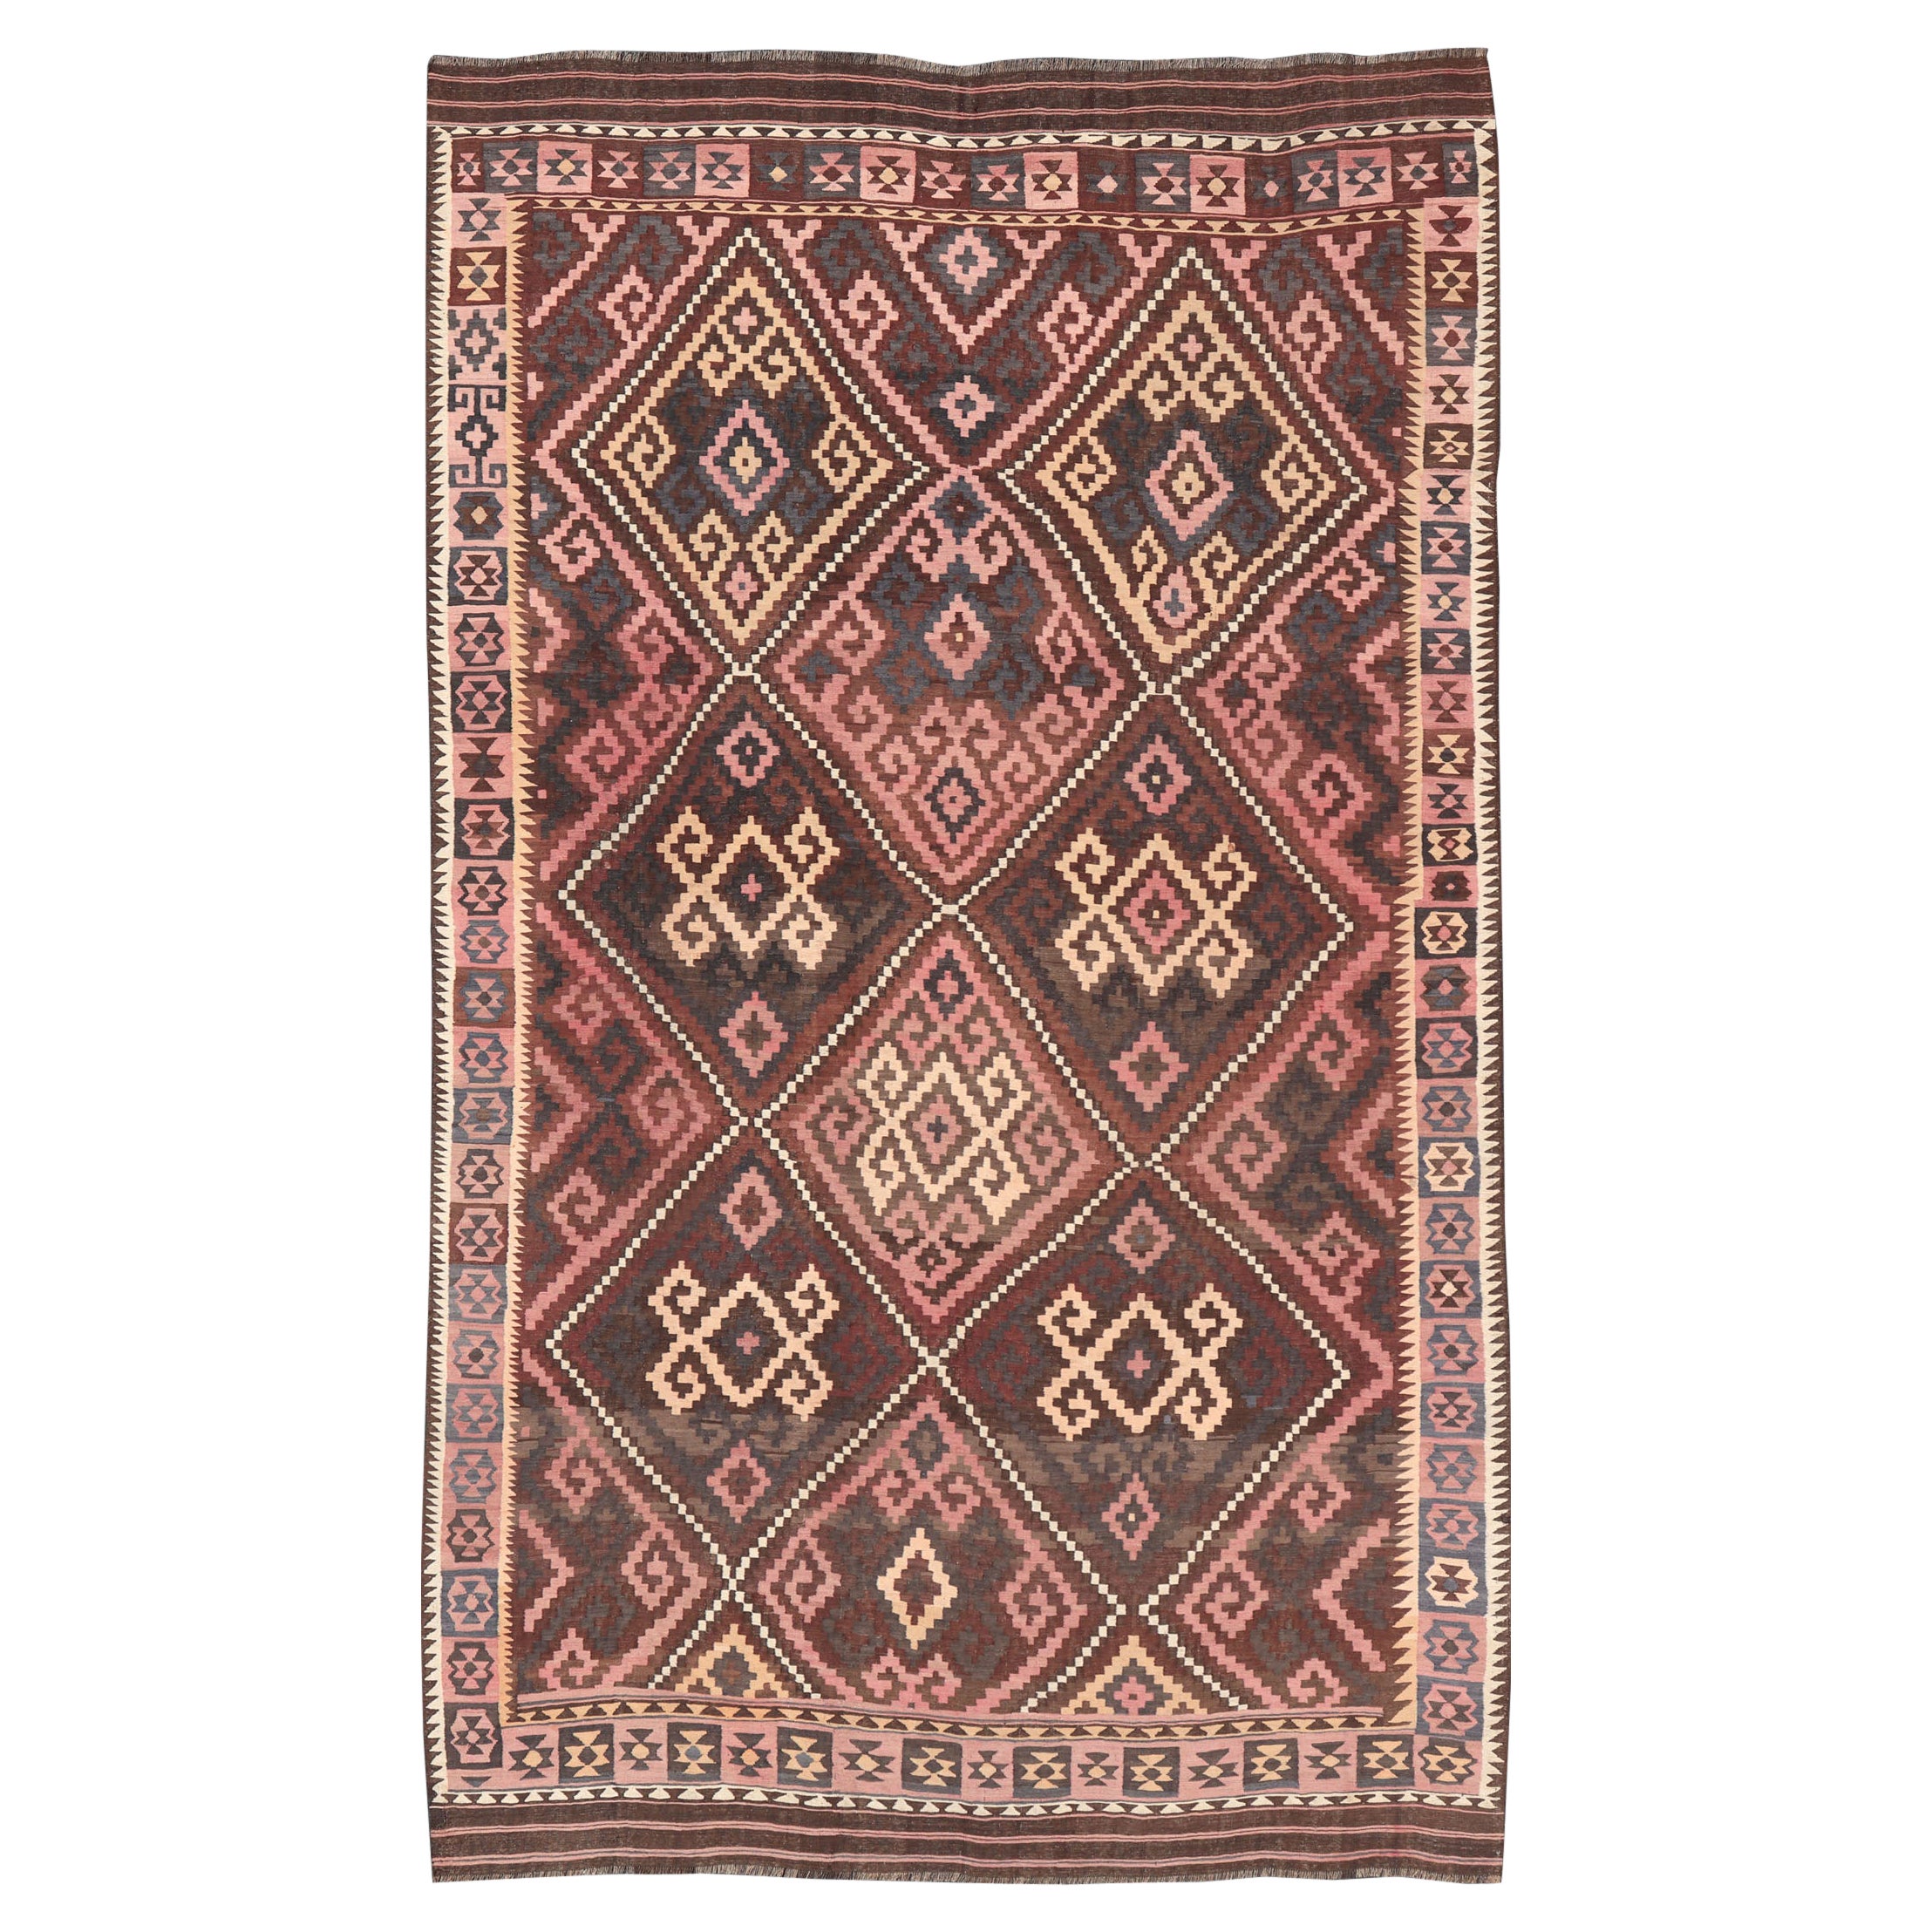 All-Over Hand Woven Geometric Kilim Diamond Design in Brown, Pink, and Ivory For Sale